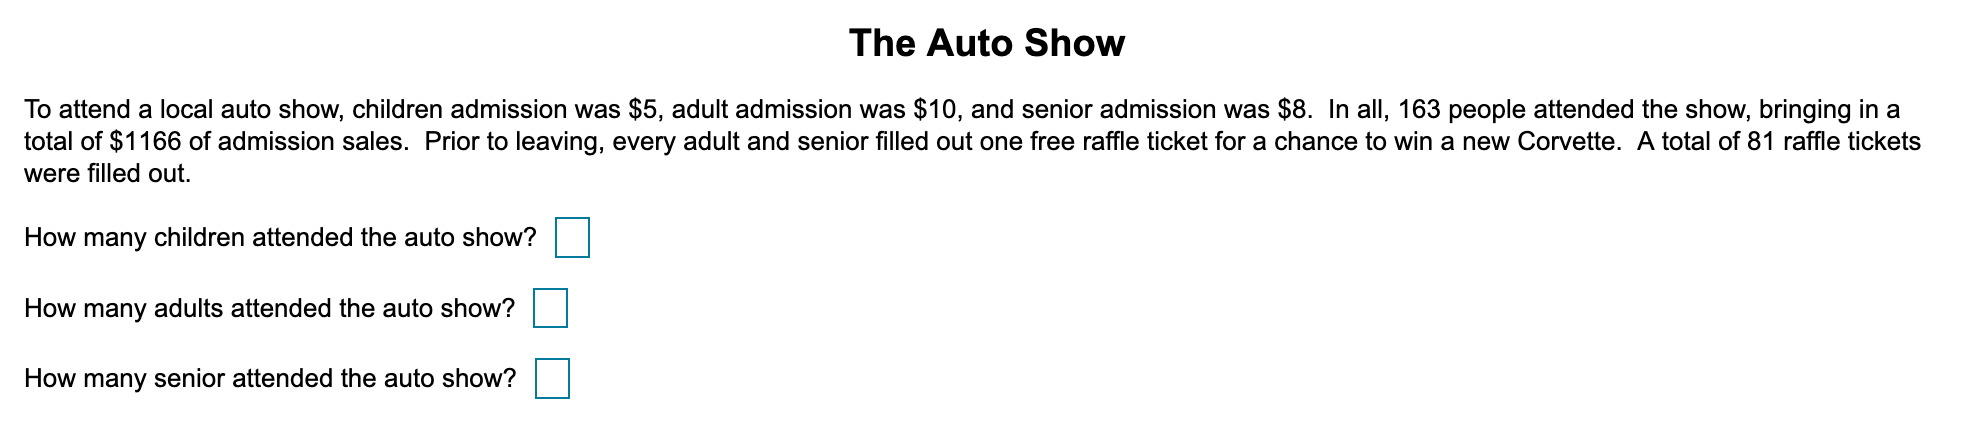 To attend a local auto show, children admission was $5, adult admission was $10, and senior admission was $8. In all, 163 people attended the show, bringing in a
total of $1166 of admission sales. Prior to leaving, every adult and senior filled out one free raffle ticket for a chance to win a new Corvette. A total of 81 raffle tickets
were filled out.
How many children attended the auto show?
How many adults attended the auto show?
How many senior attended the auto show?
